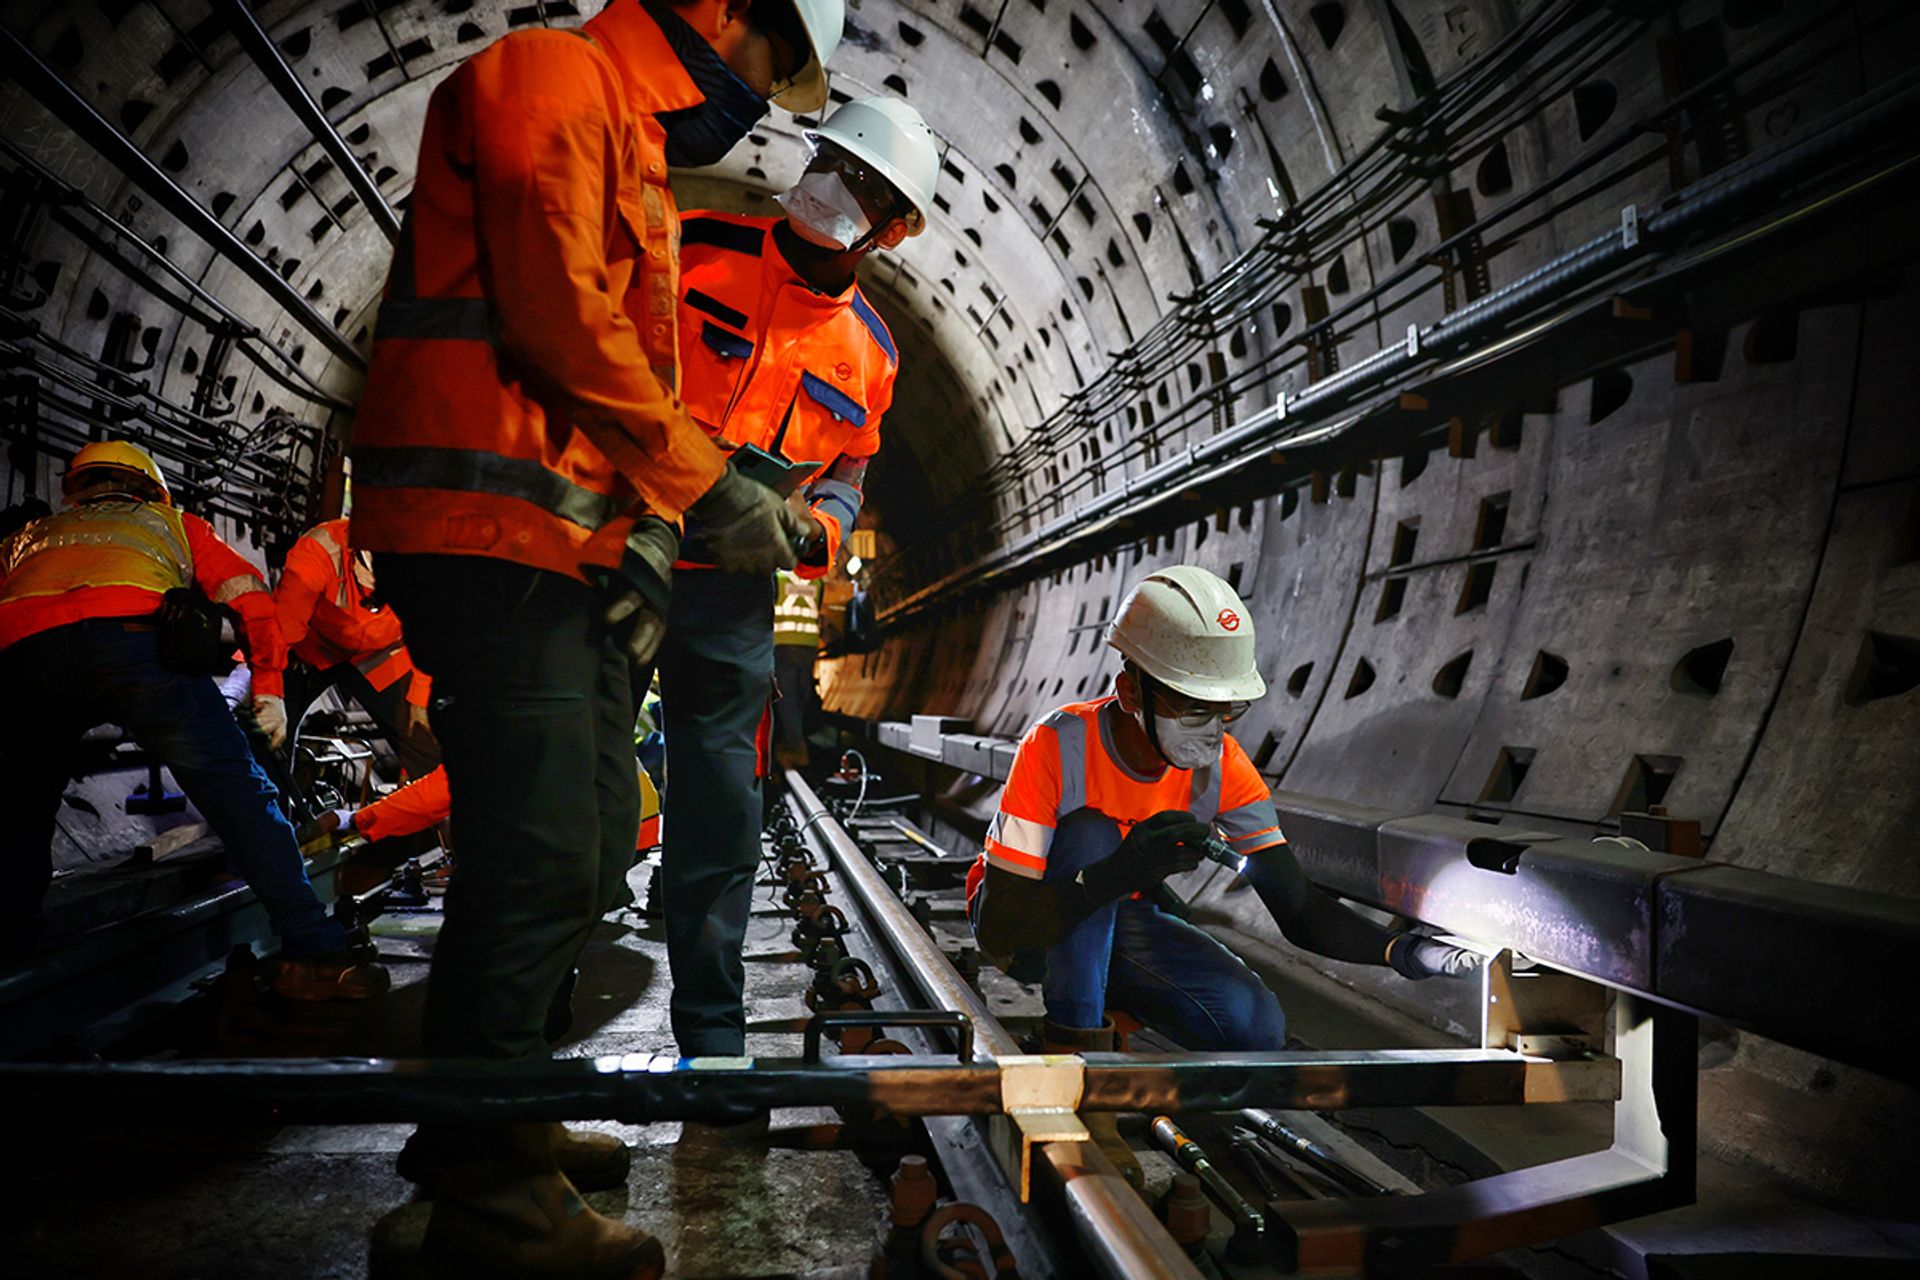 Workers measuring the distance between the running rail and the power rail, which supplies electricity to the track. Precision is key so that trains that run on the tracks can draw power. ST PHOTO: JASON QUAH